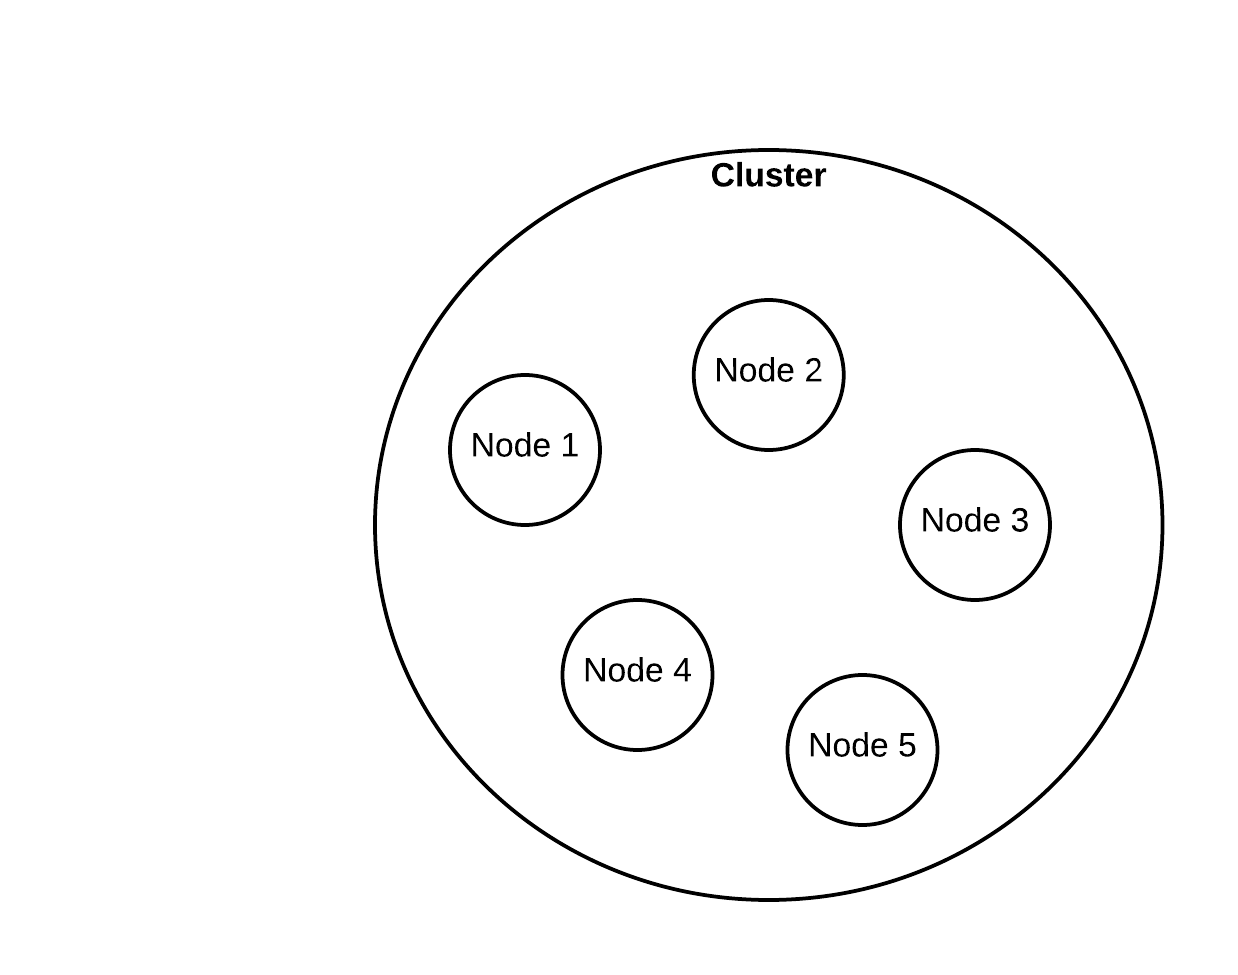 Cluster and Nodes